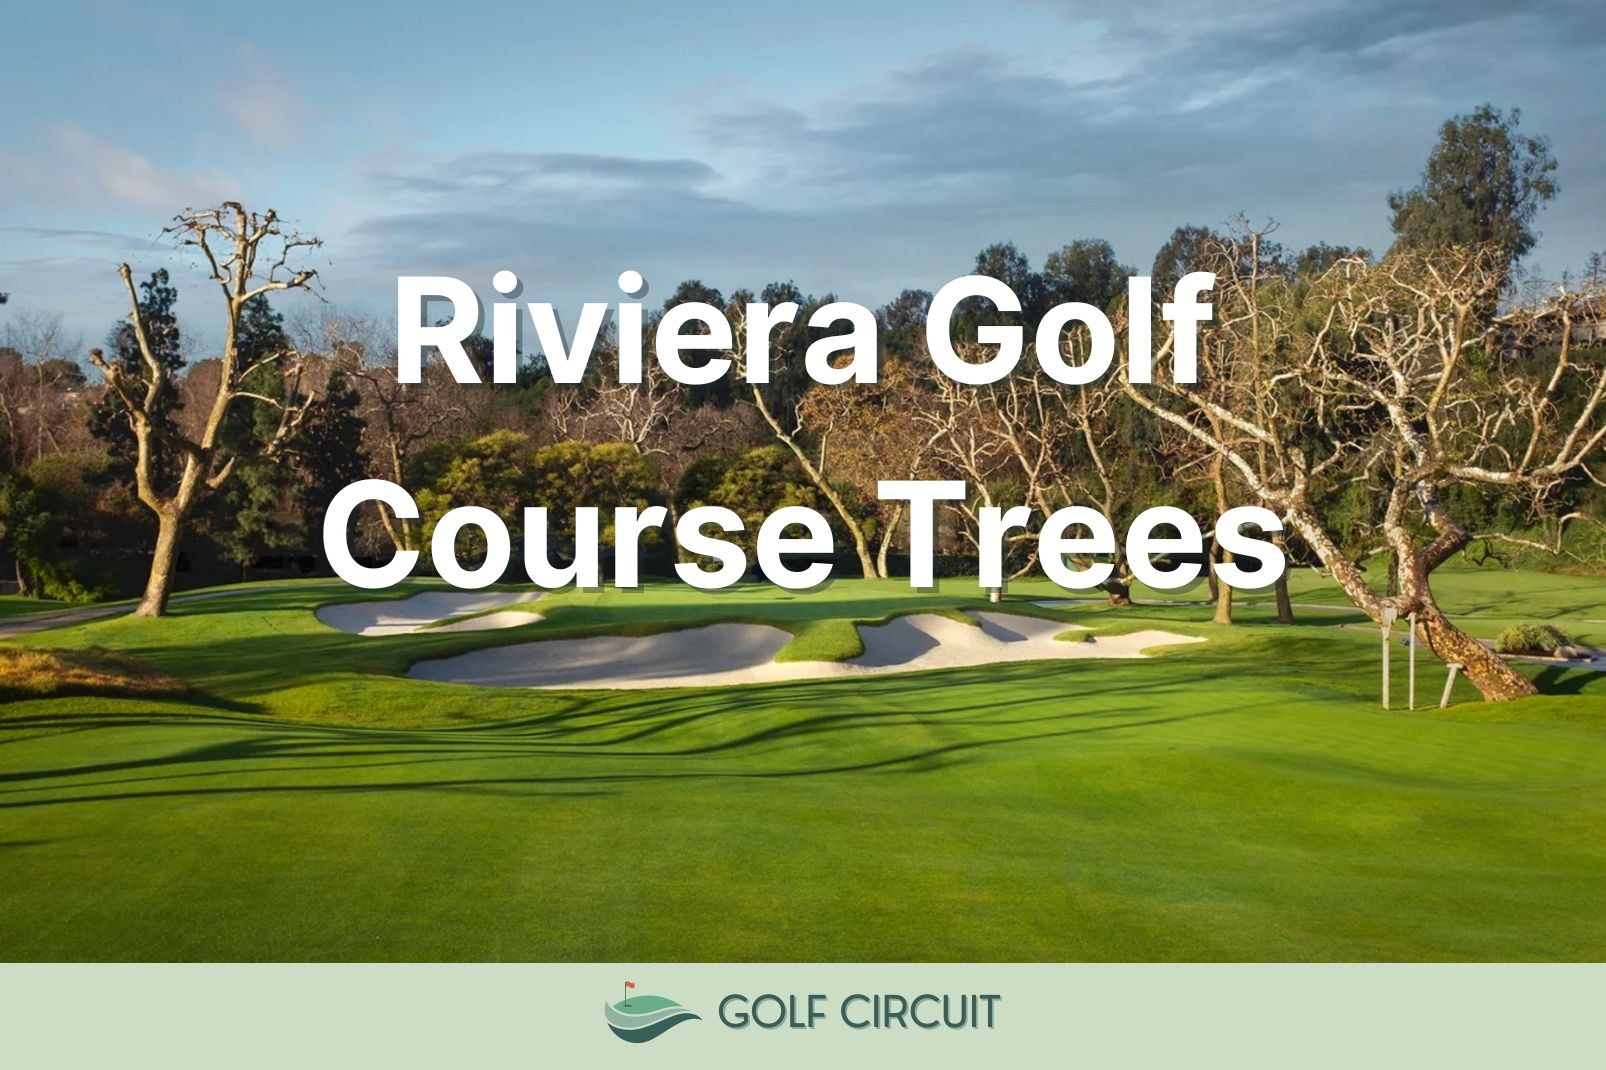 riviera golf course trees